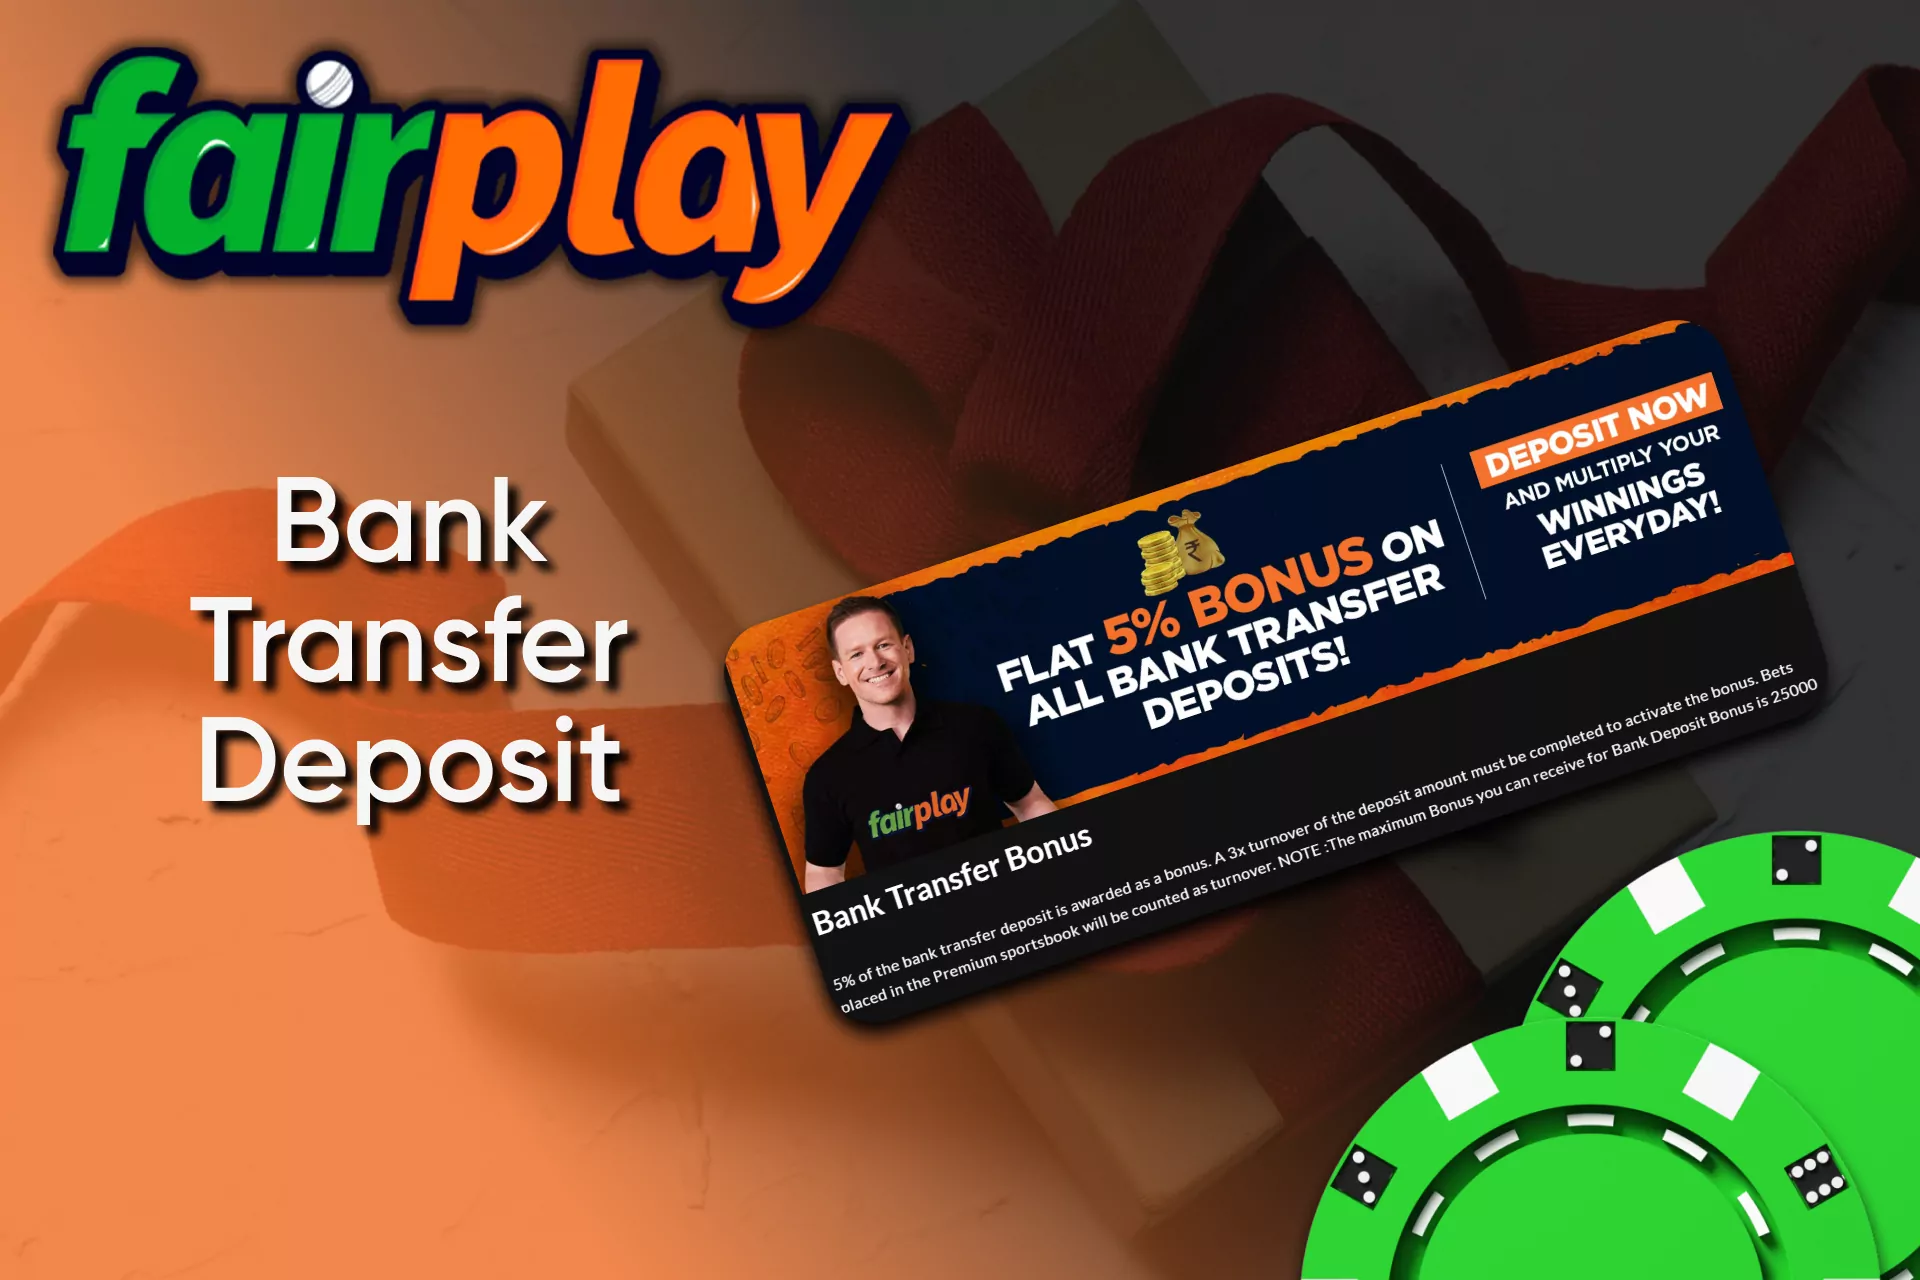 There is a bonus for bank transfers as well on Fairplay.